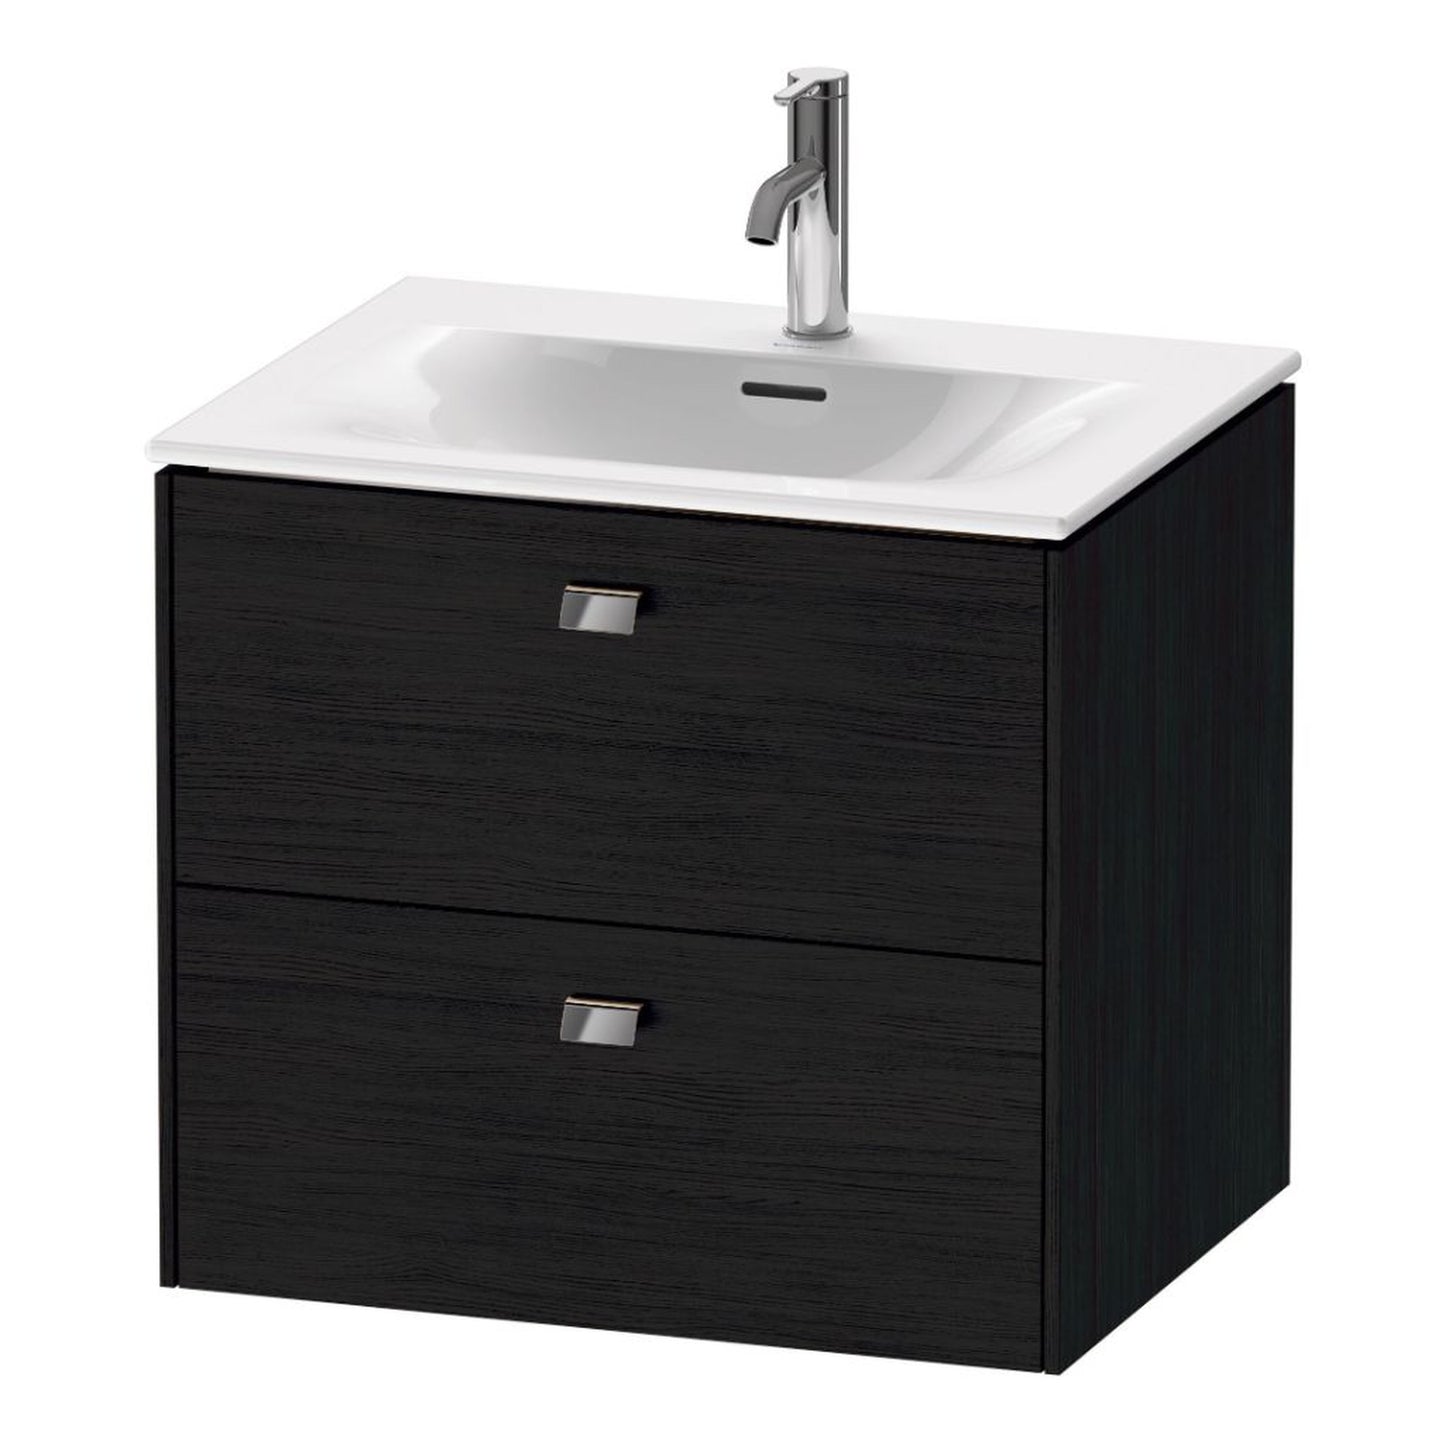 Duravit Brioso BR43100 24" x 22" x 19" Two Drawer Wall-Mount Vanity Unit in Black Oak and Chrome Handle